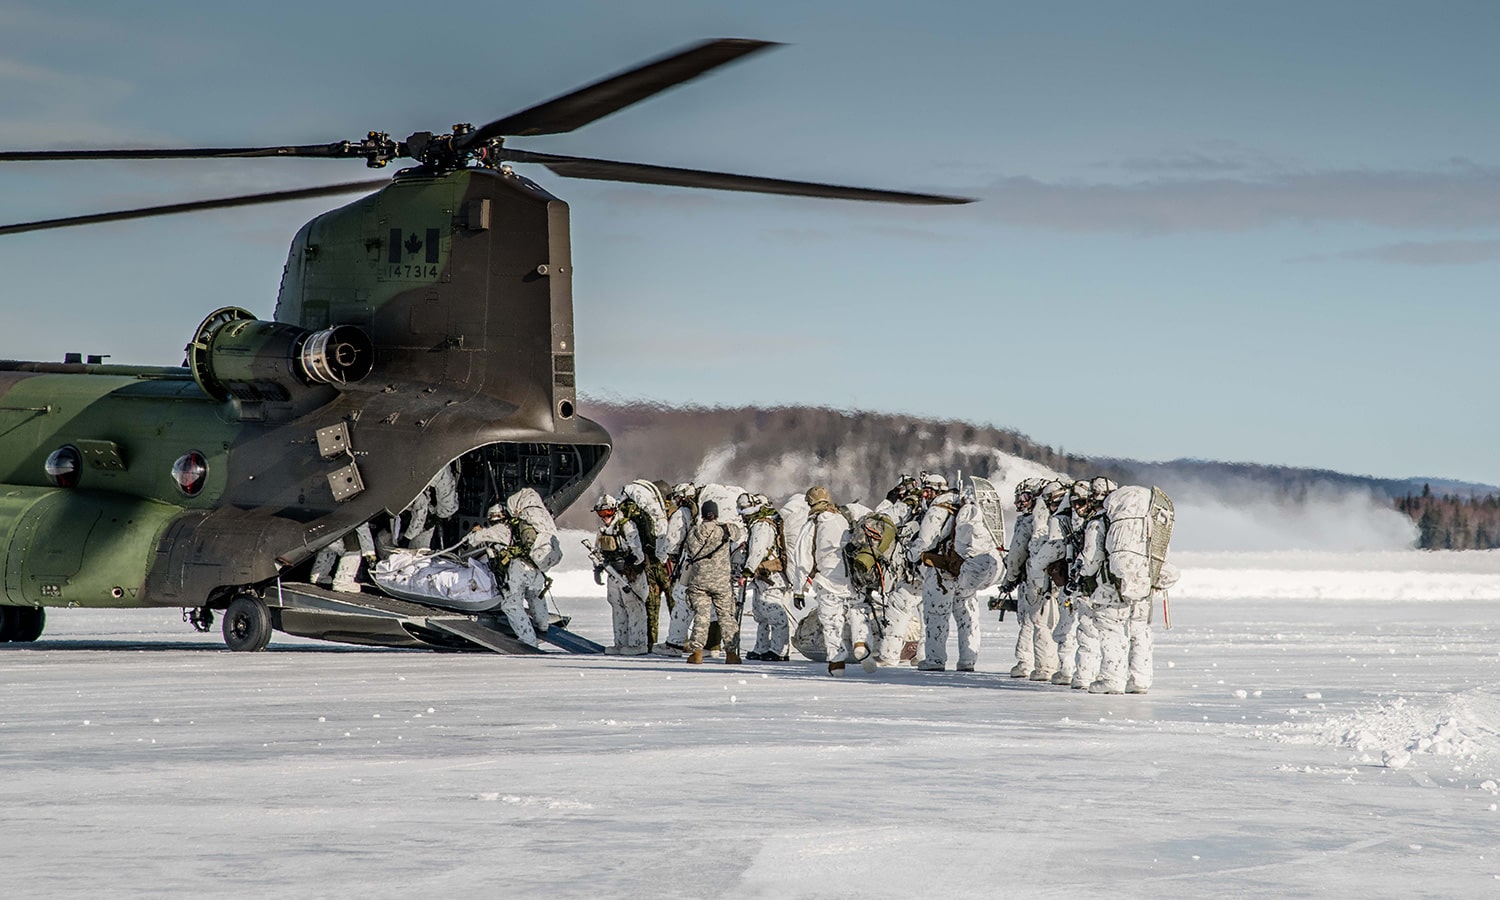 Members loading helicopter in snow